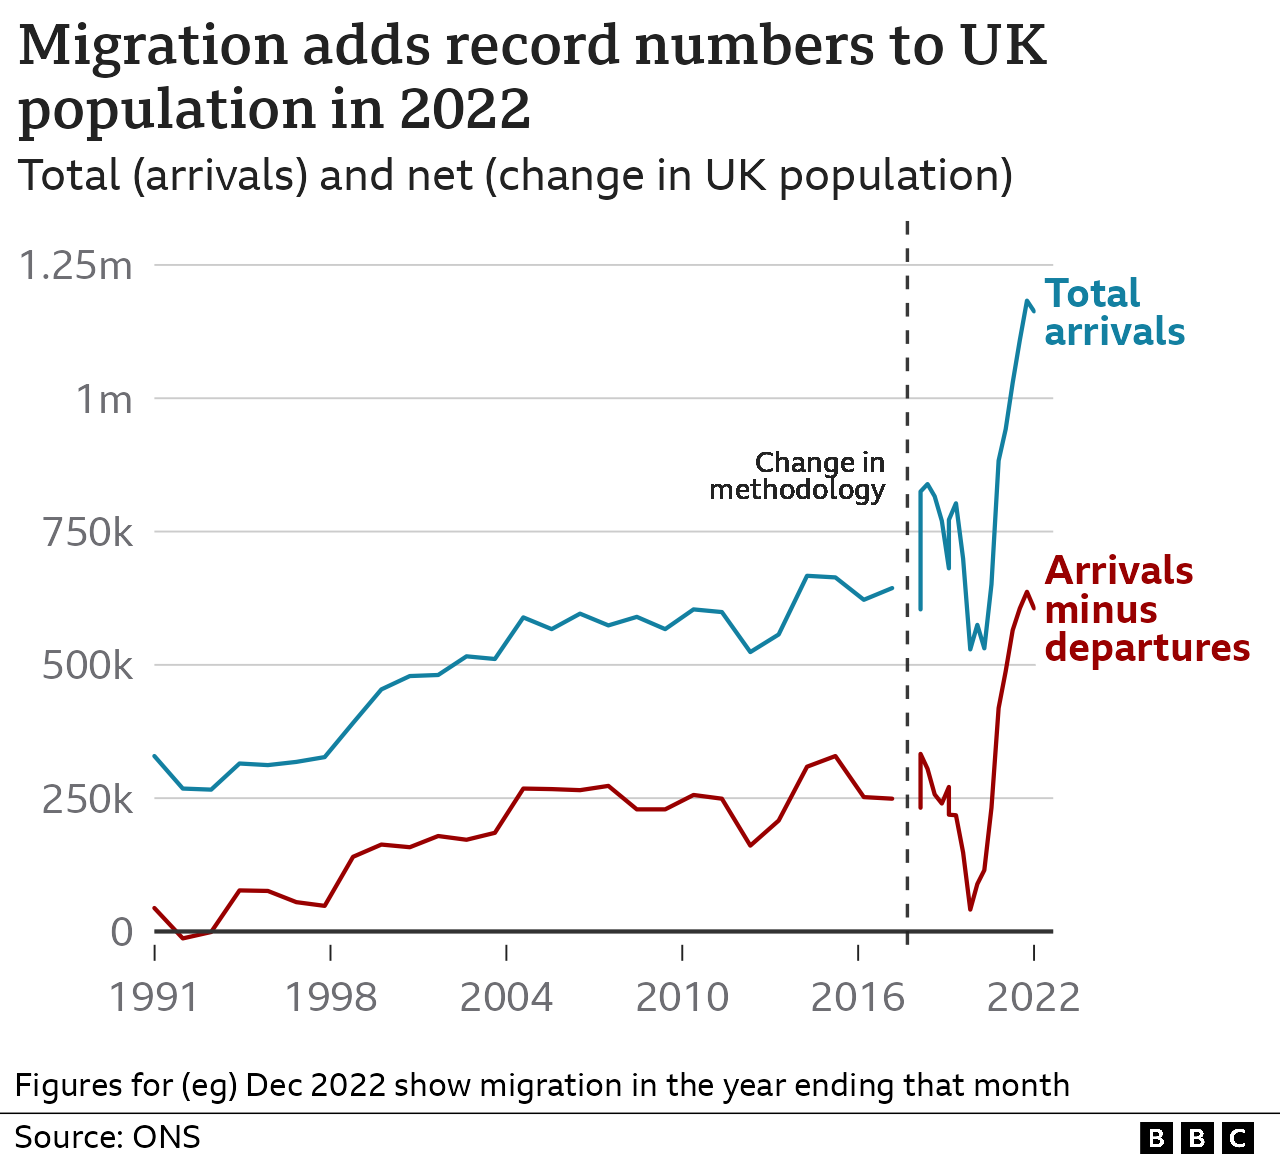 A line chart with two lines, arrivals and net migration, giving an overview of migration to the UK since 1991. The data from 1991 to 2018 shows a steady rise in both groups. The methodology changes from 2018 onwards but shows a sharp rise and then slight dip in the latest month, with arrivals at over one million and net migration at about 600,000